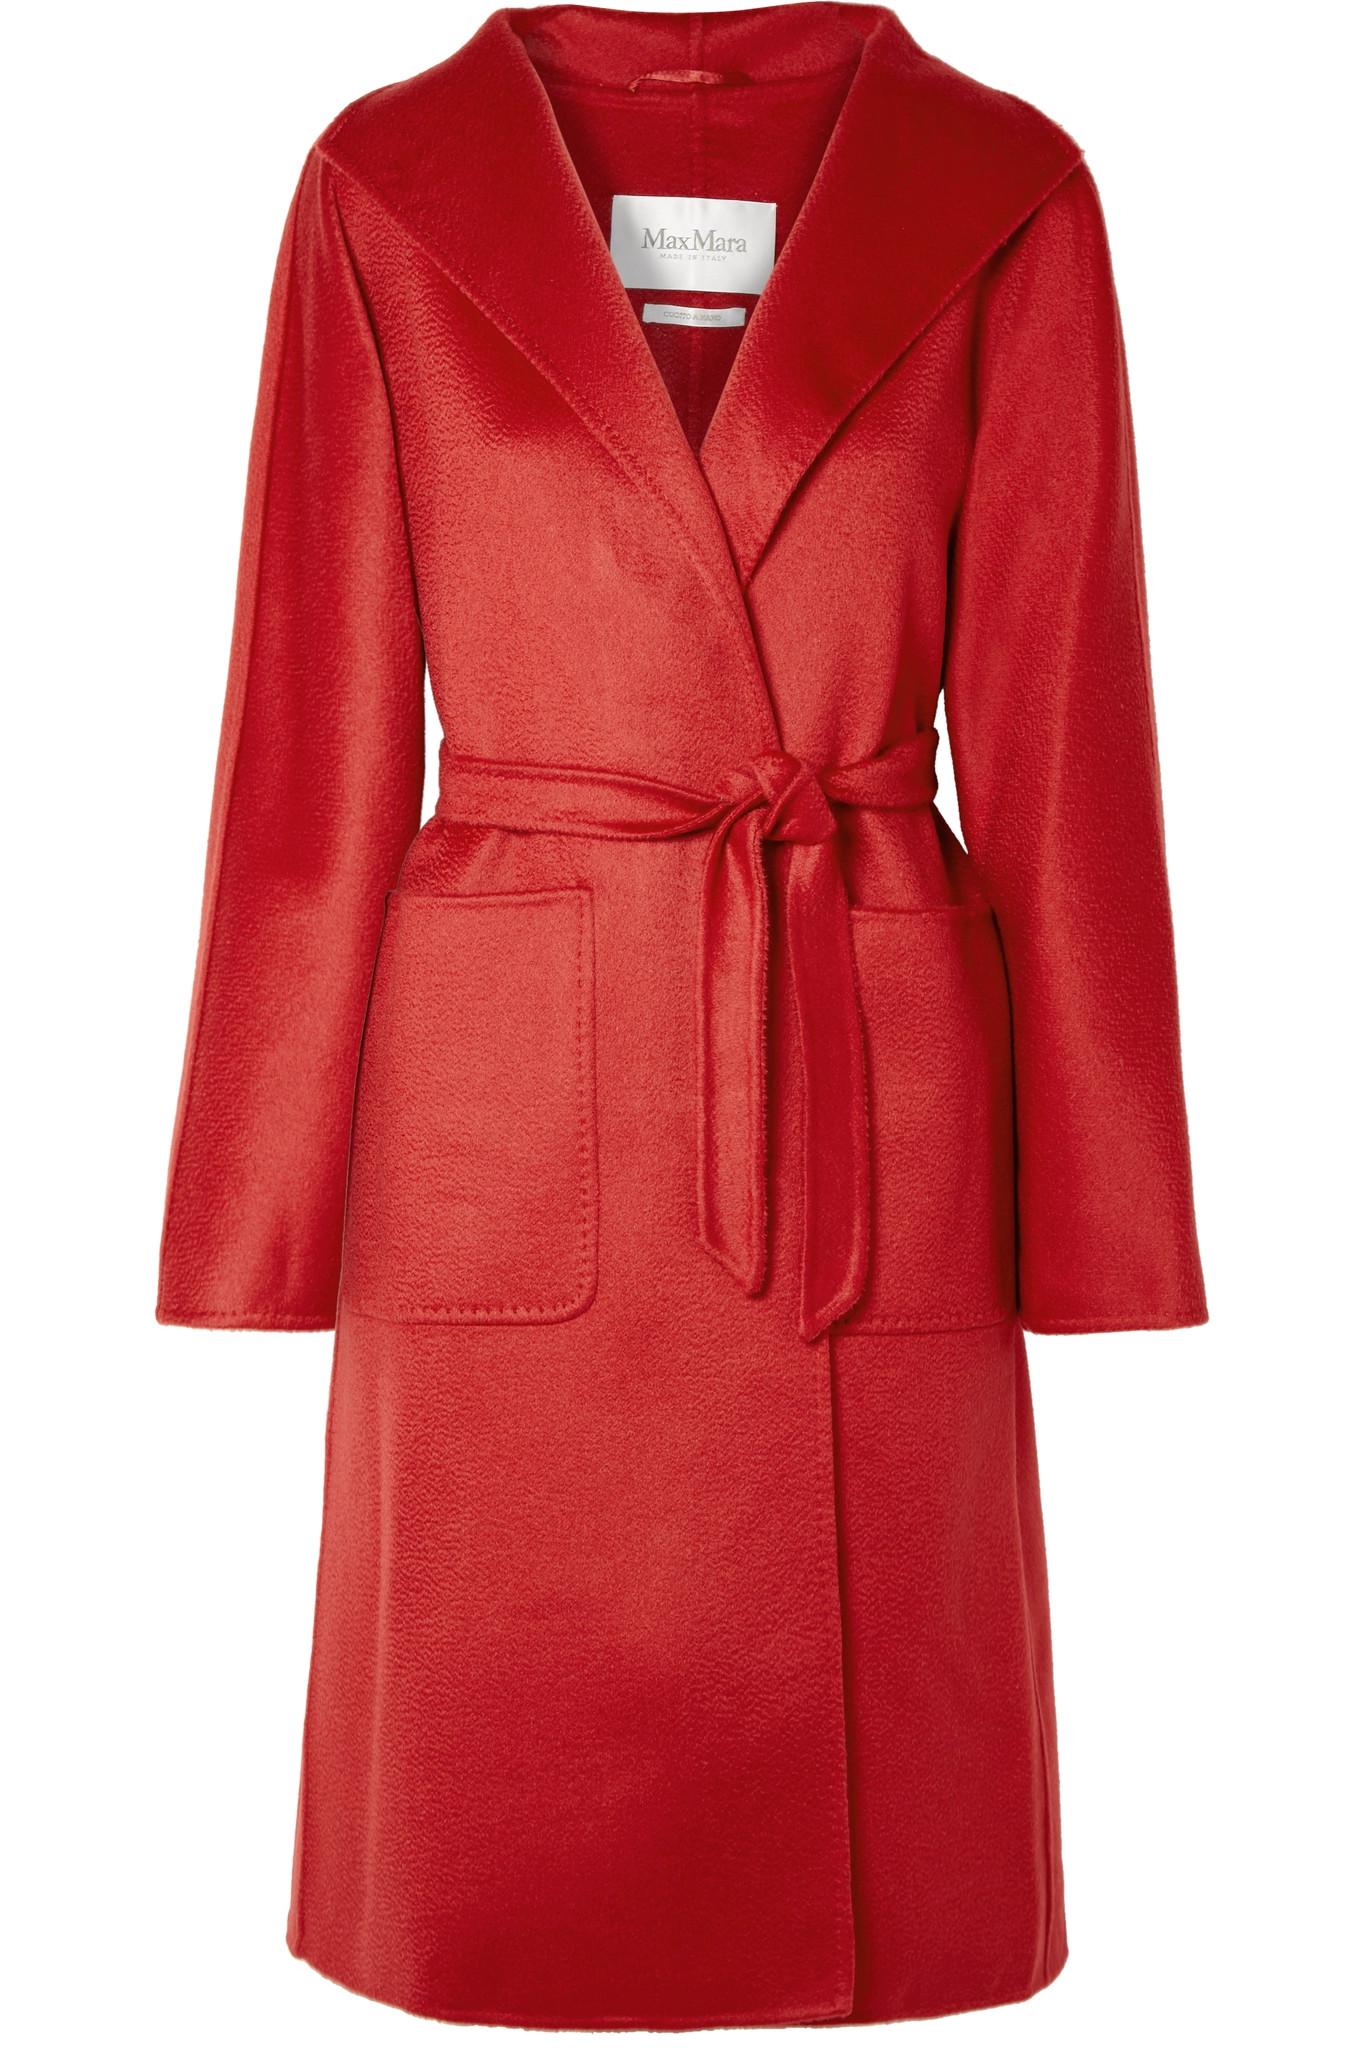 Lyst - Max Mara Lilia Belted Brushed-cashmere Coat in Red